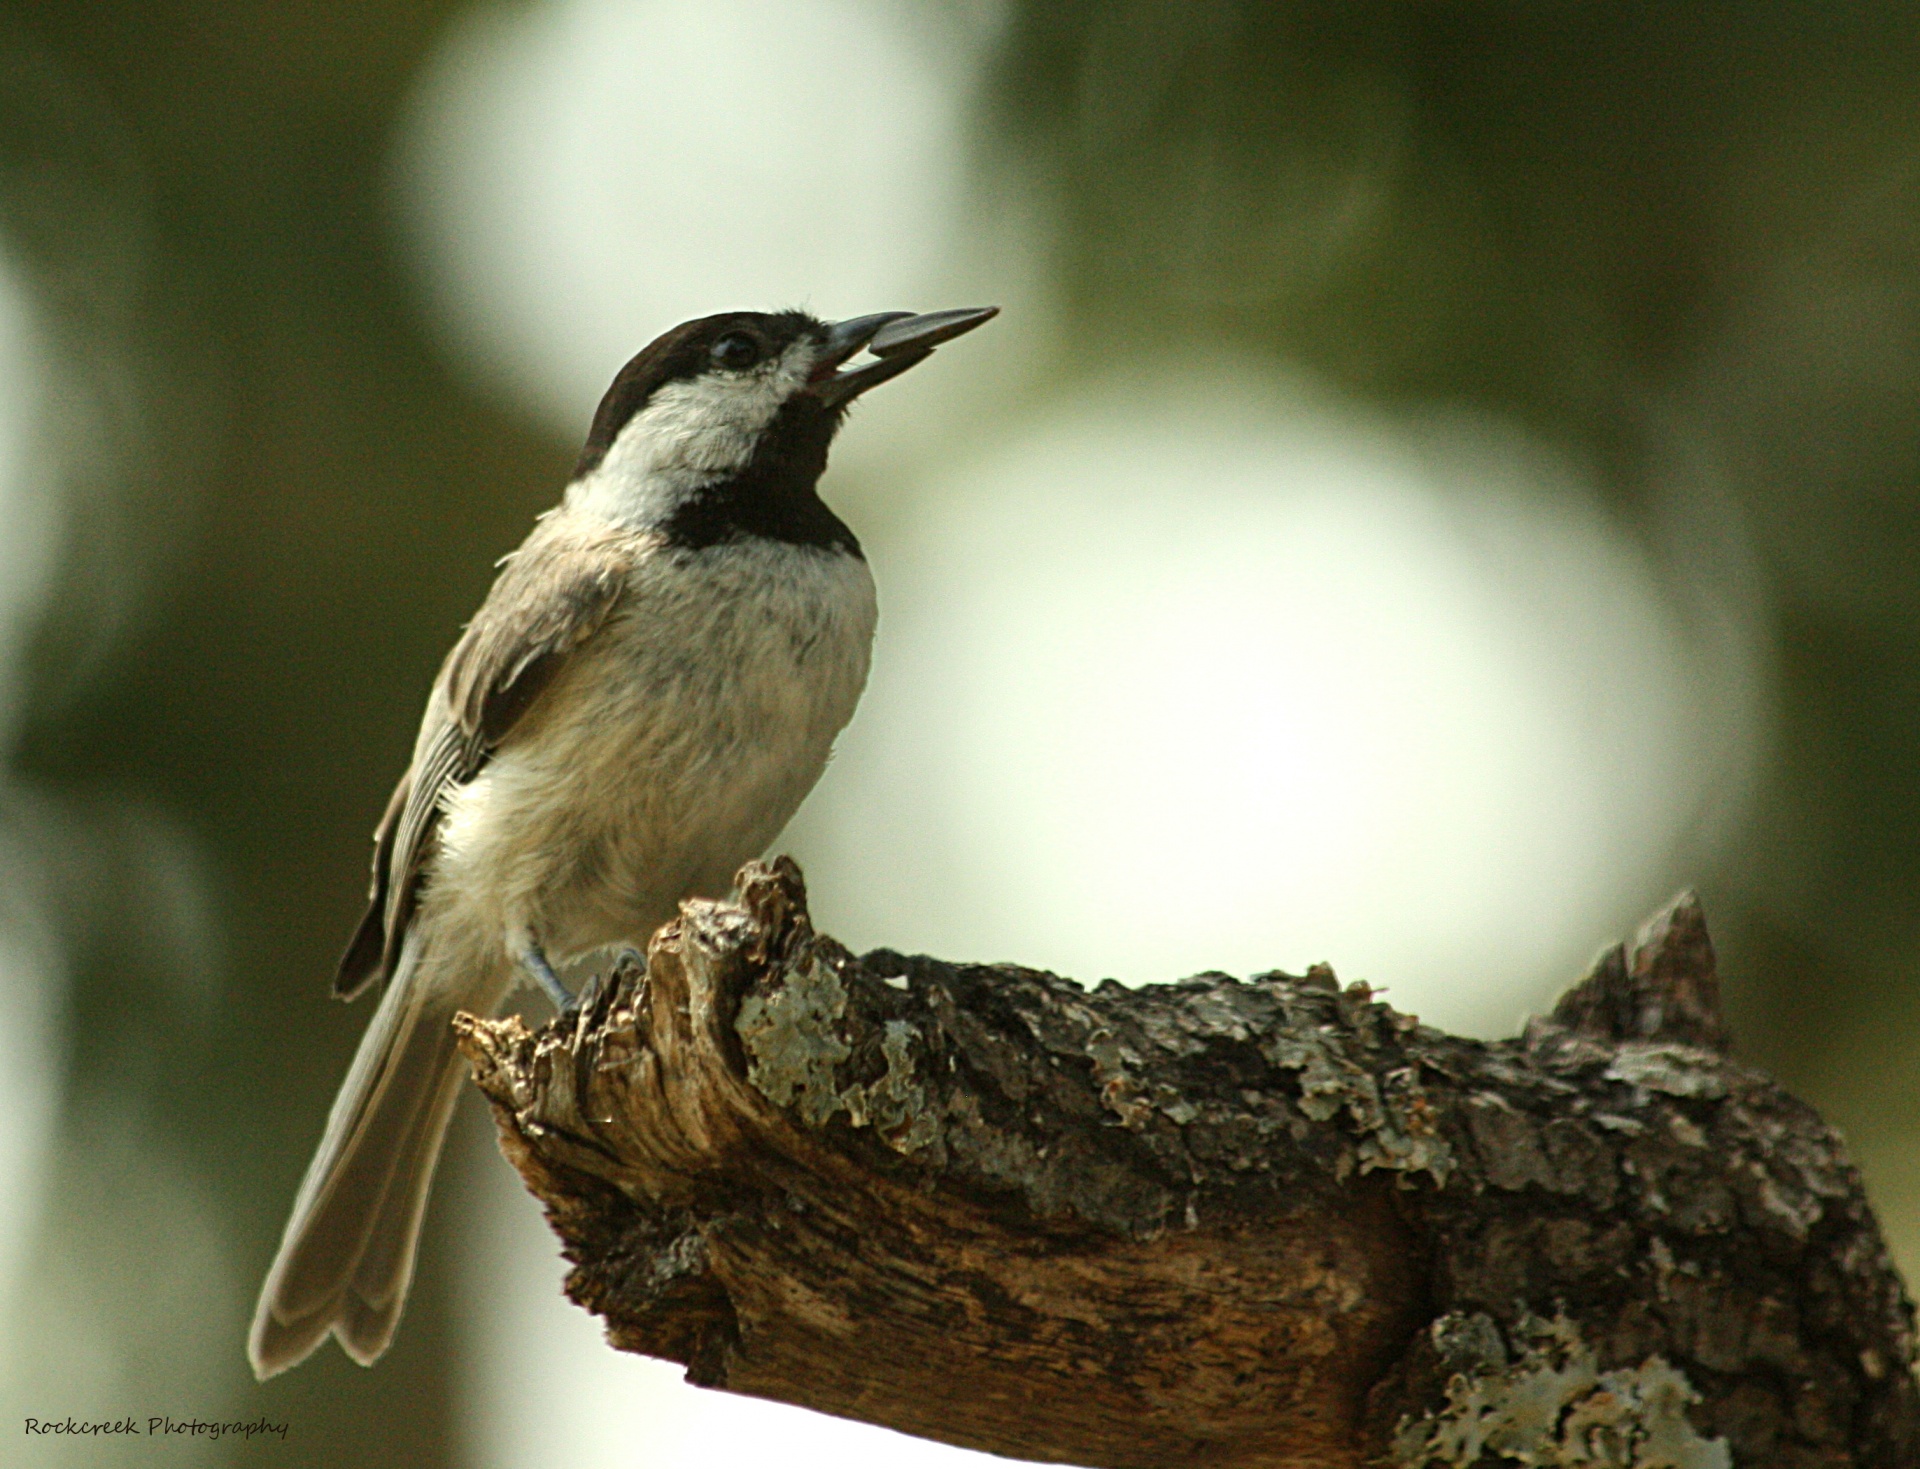 A cute little black-capped chickadee is perched on a tree limb with a sunflower seed in his beak.